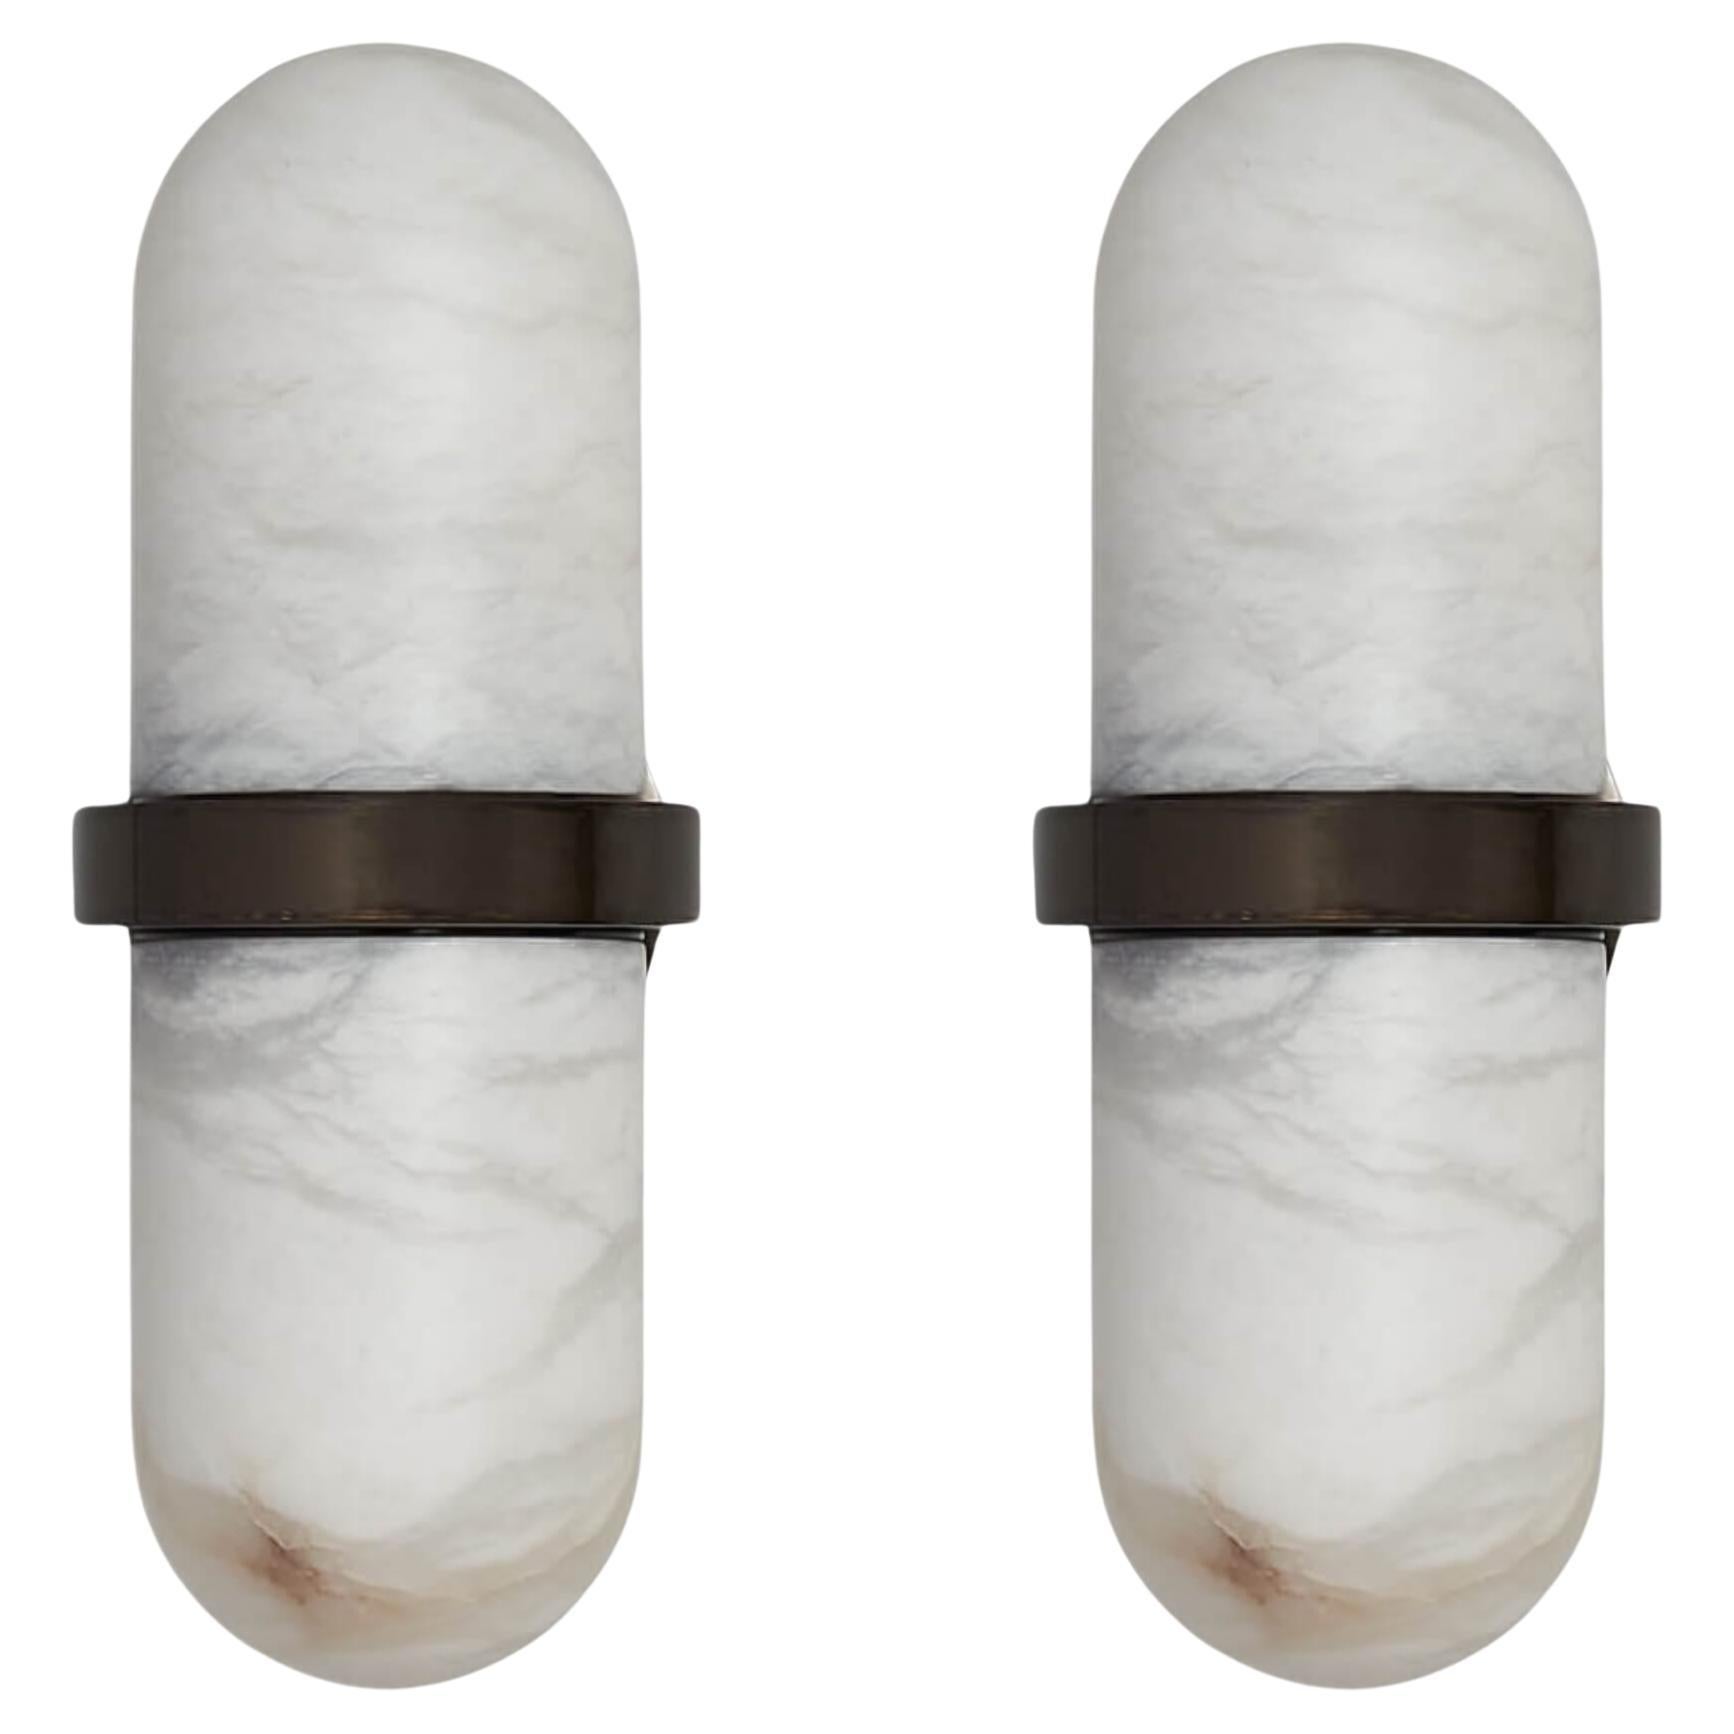 Pair of Minimalist Italian Alabaster Wall Sconce "Pill" by Droulers Architecture